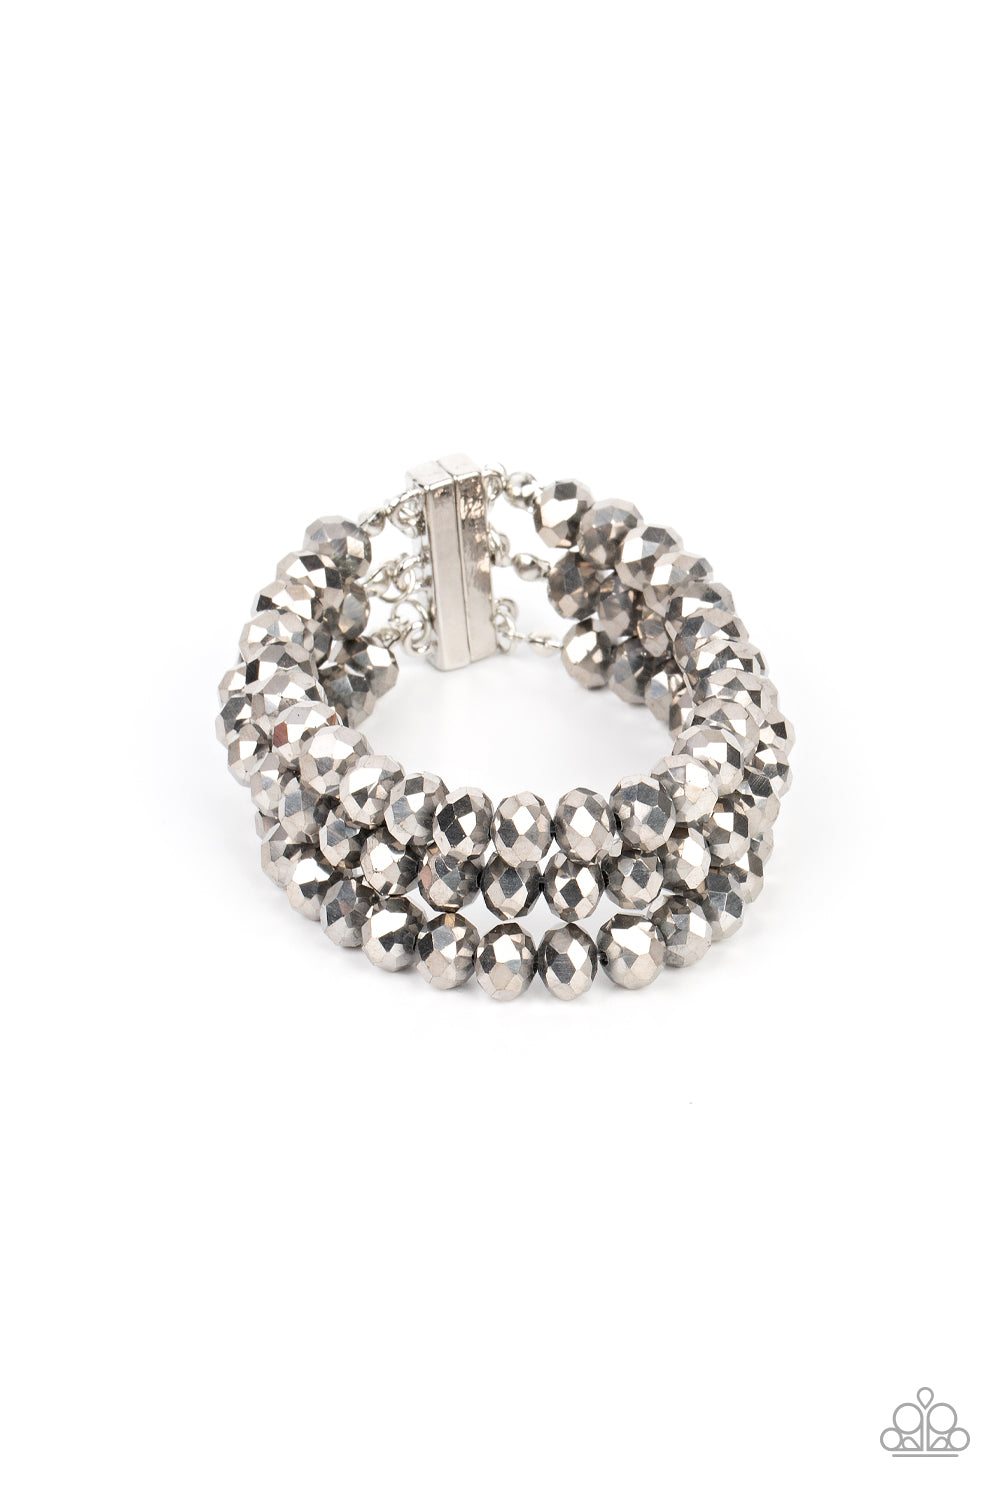 Paparazzi Accessories Supernova Sultry - Silver Magnetic Bracelets rows of hematite crystal-like beads are threaded along invisible wires around the wrist, layering into a smoldering sparkle. Features a magnetic closure.  Sold as one individual bracelet.